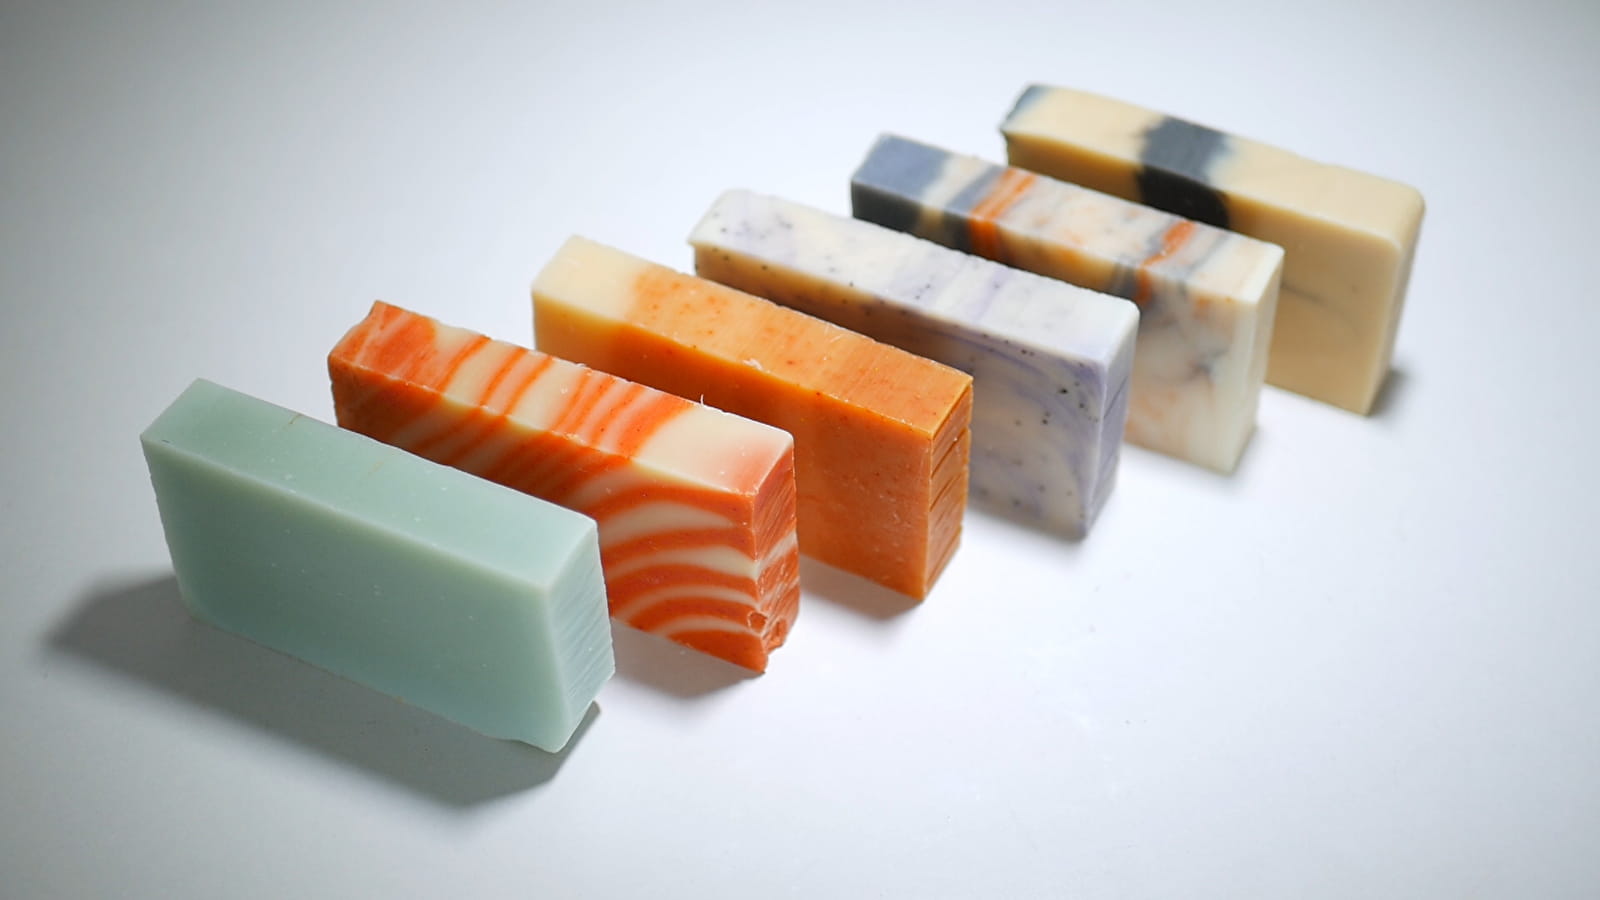 Learn how to make your own cold process soaps